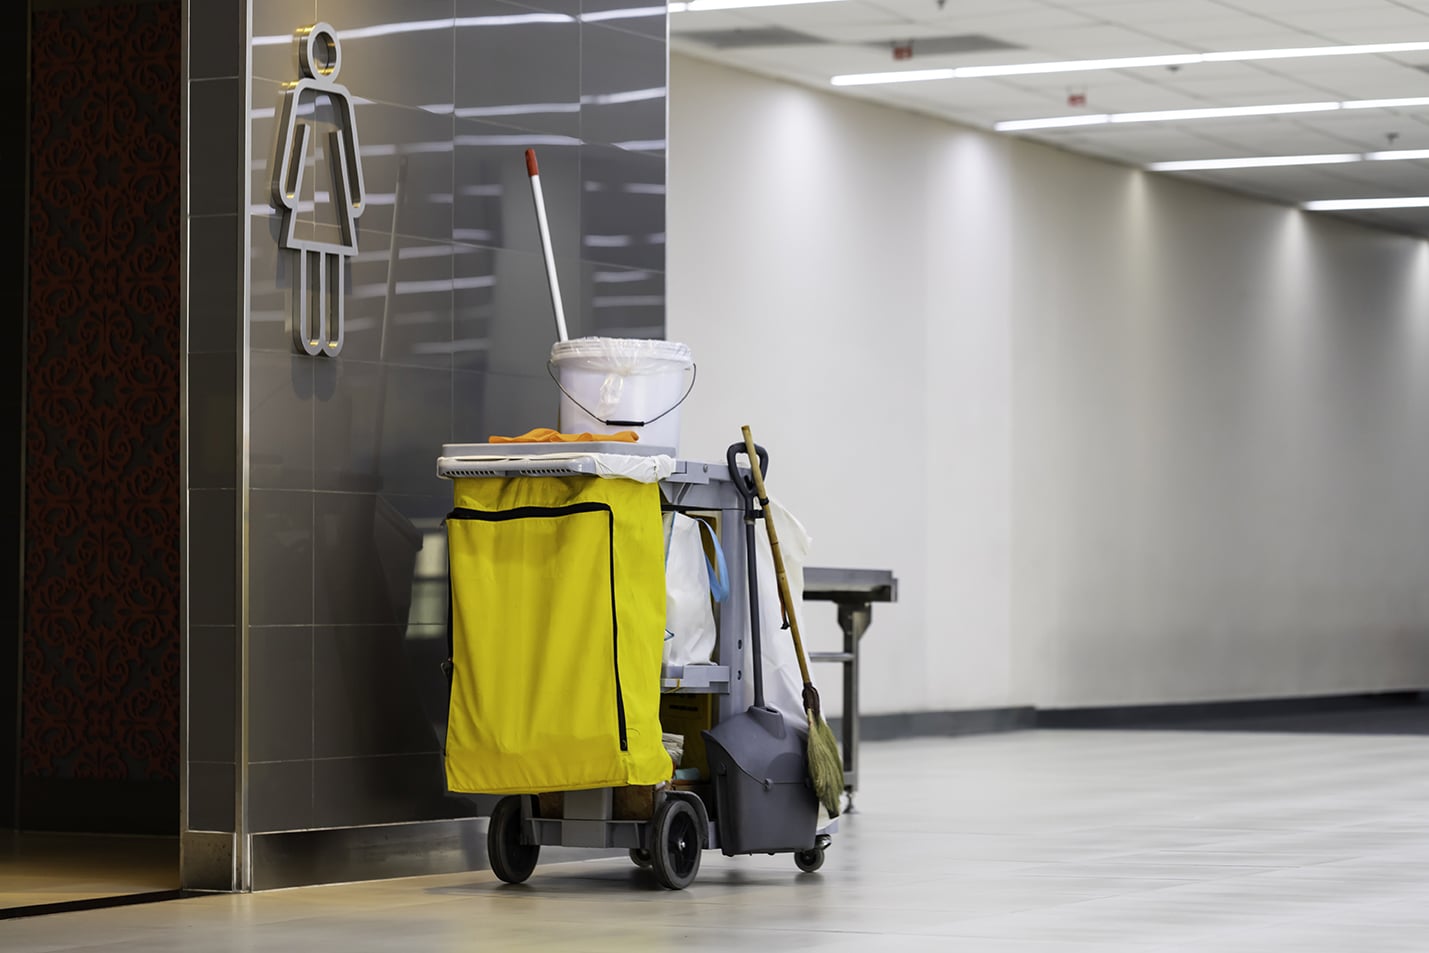 Commercial Bathroom Cleaning and Sanitization - Dura-Shine Clean